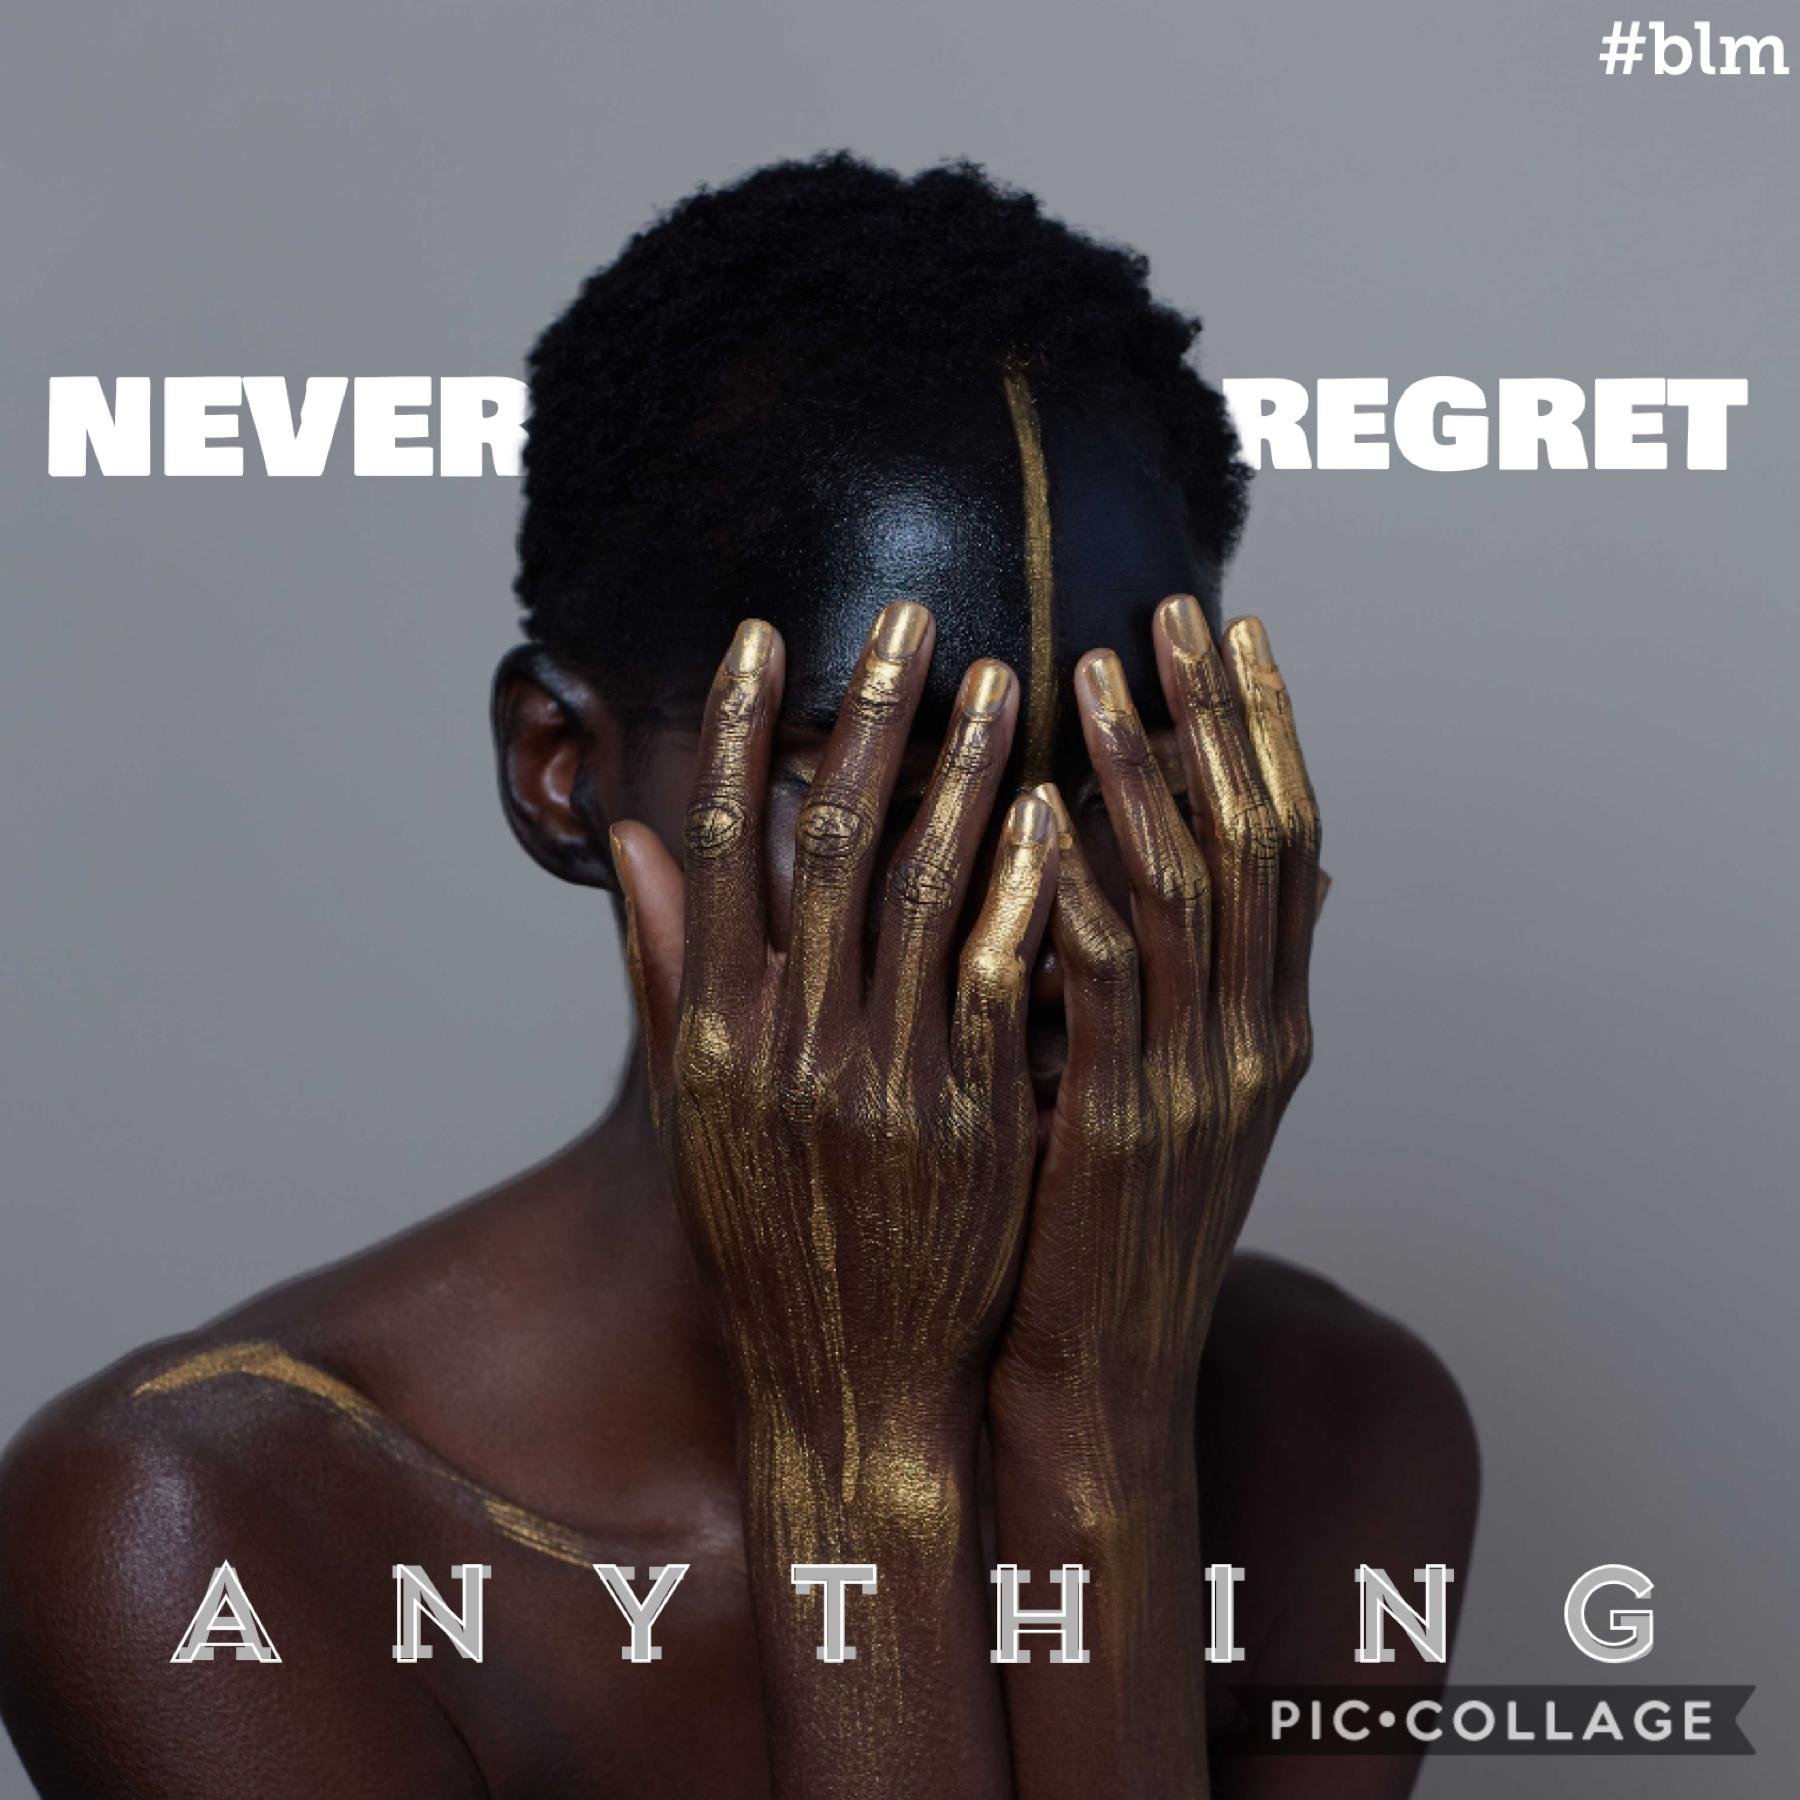 👼🏻👼🏼👼🏽👼🏾👼🏿

#blm

BLACK LIVES MATTER

I want all you people to understand that you should never regret doing what’s right, standing up against the racists, and above all NEVER regret your life, because you are important, no matter what others say

WE WILL